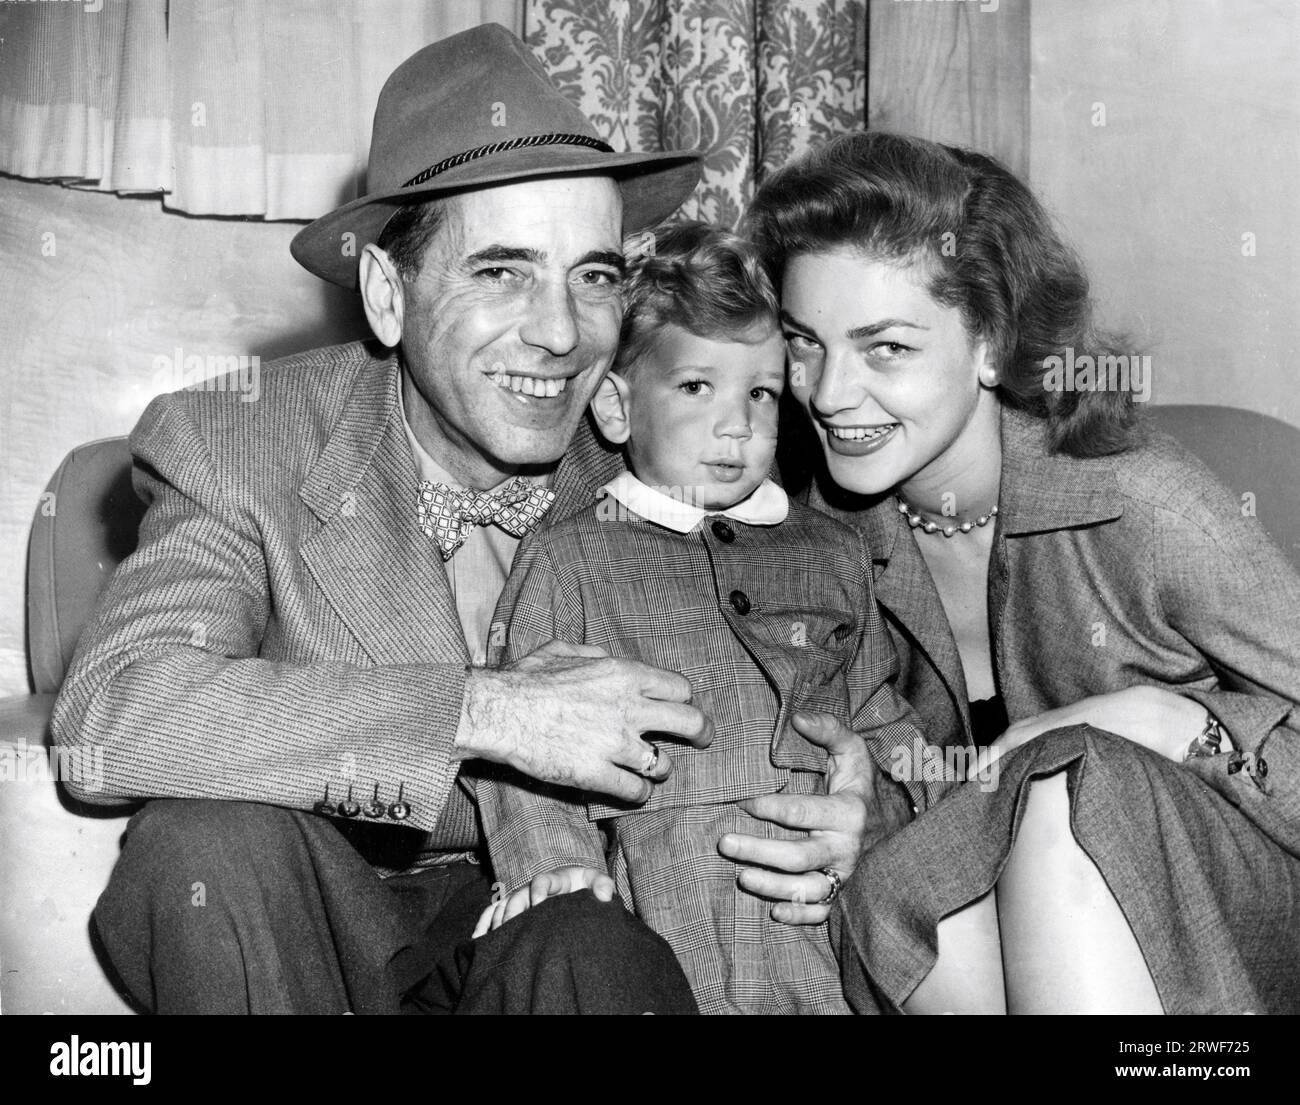 HUMPHREY BOGART and his wife LAUREN BACALL with their son STEPHEN BOGART on board the ocean liner Ile de France on 8th September 1951 just before sailing from Southampton for New York after completion of studio filming of The African Queen at Isleworth Studios in England Stock Photo